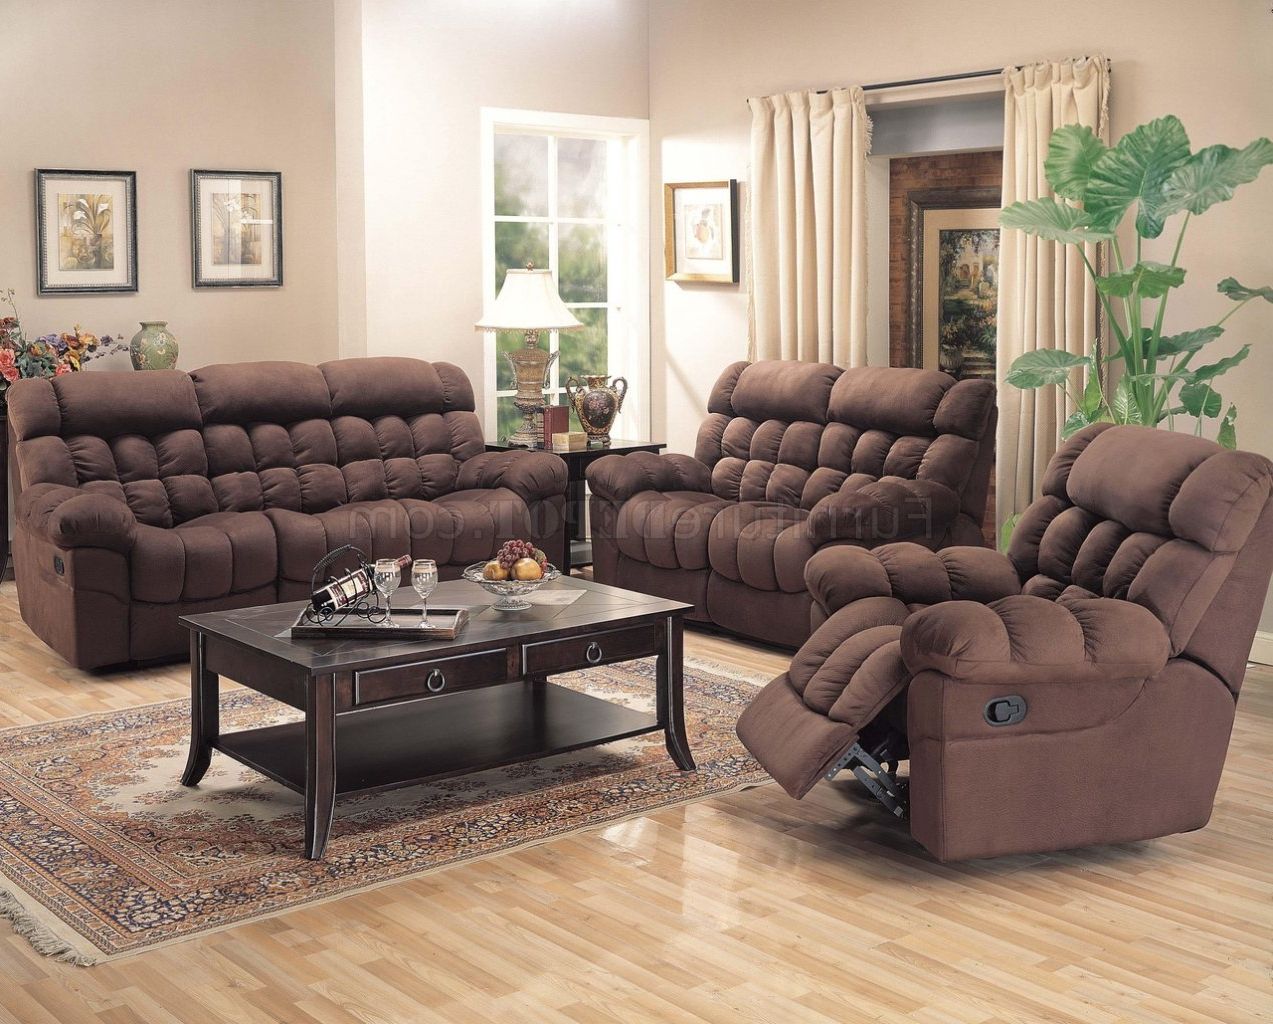 Chocolate Microfiber Modern Reclining Living Room Sofa W/options With Regard To Famous 2 Tone Chocolate Microfiber Sofas (Photo 8 of 15)